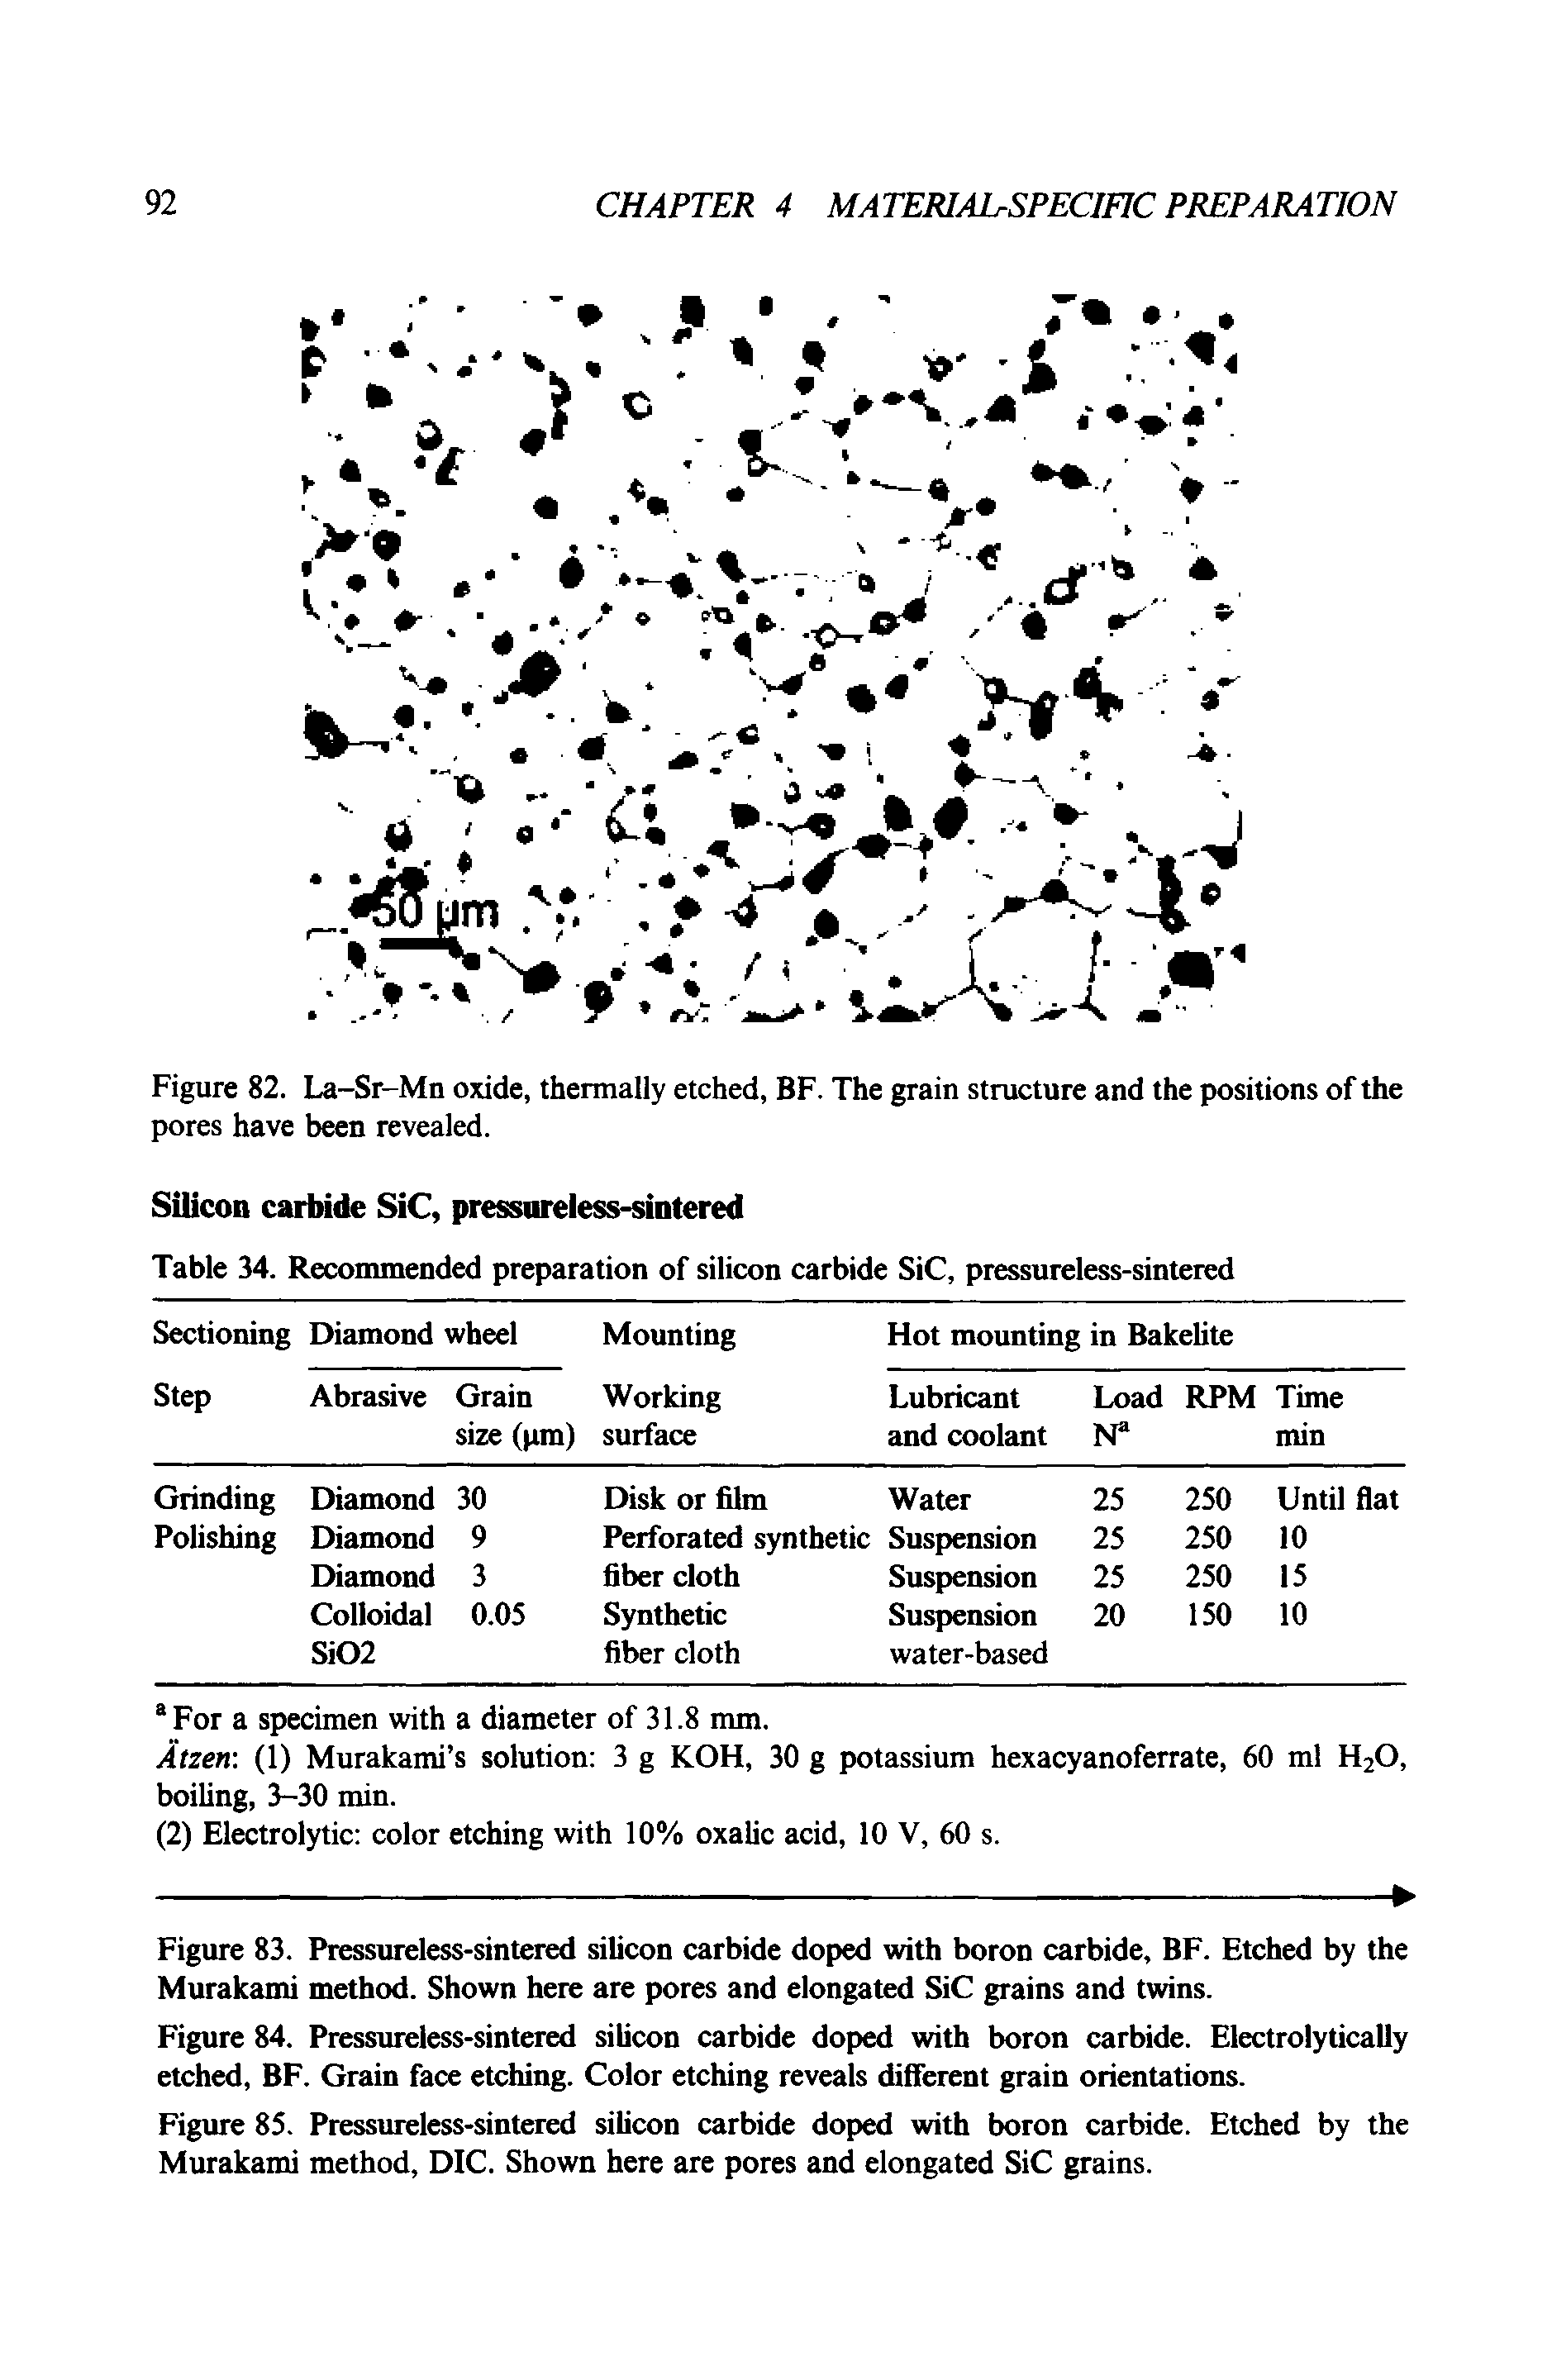 Figure 84. Pressureless-sintered silicon carbide doped with boron carbide. Electrolytically etched, BF. Grain face etching. Color etching reveals different grain orientations.